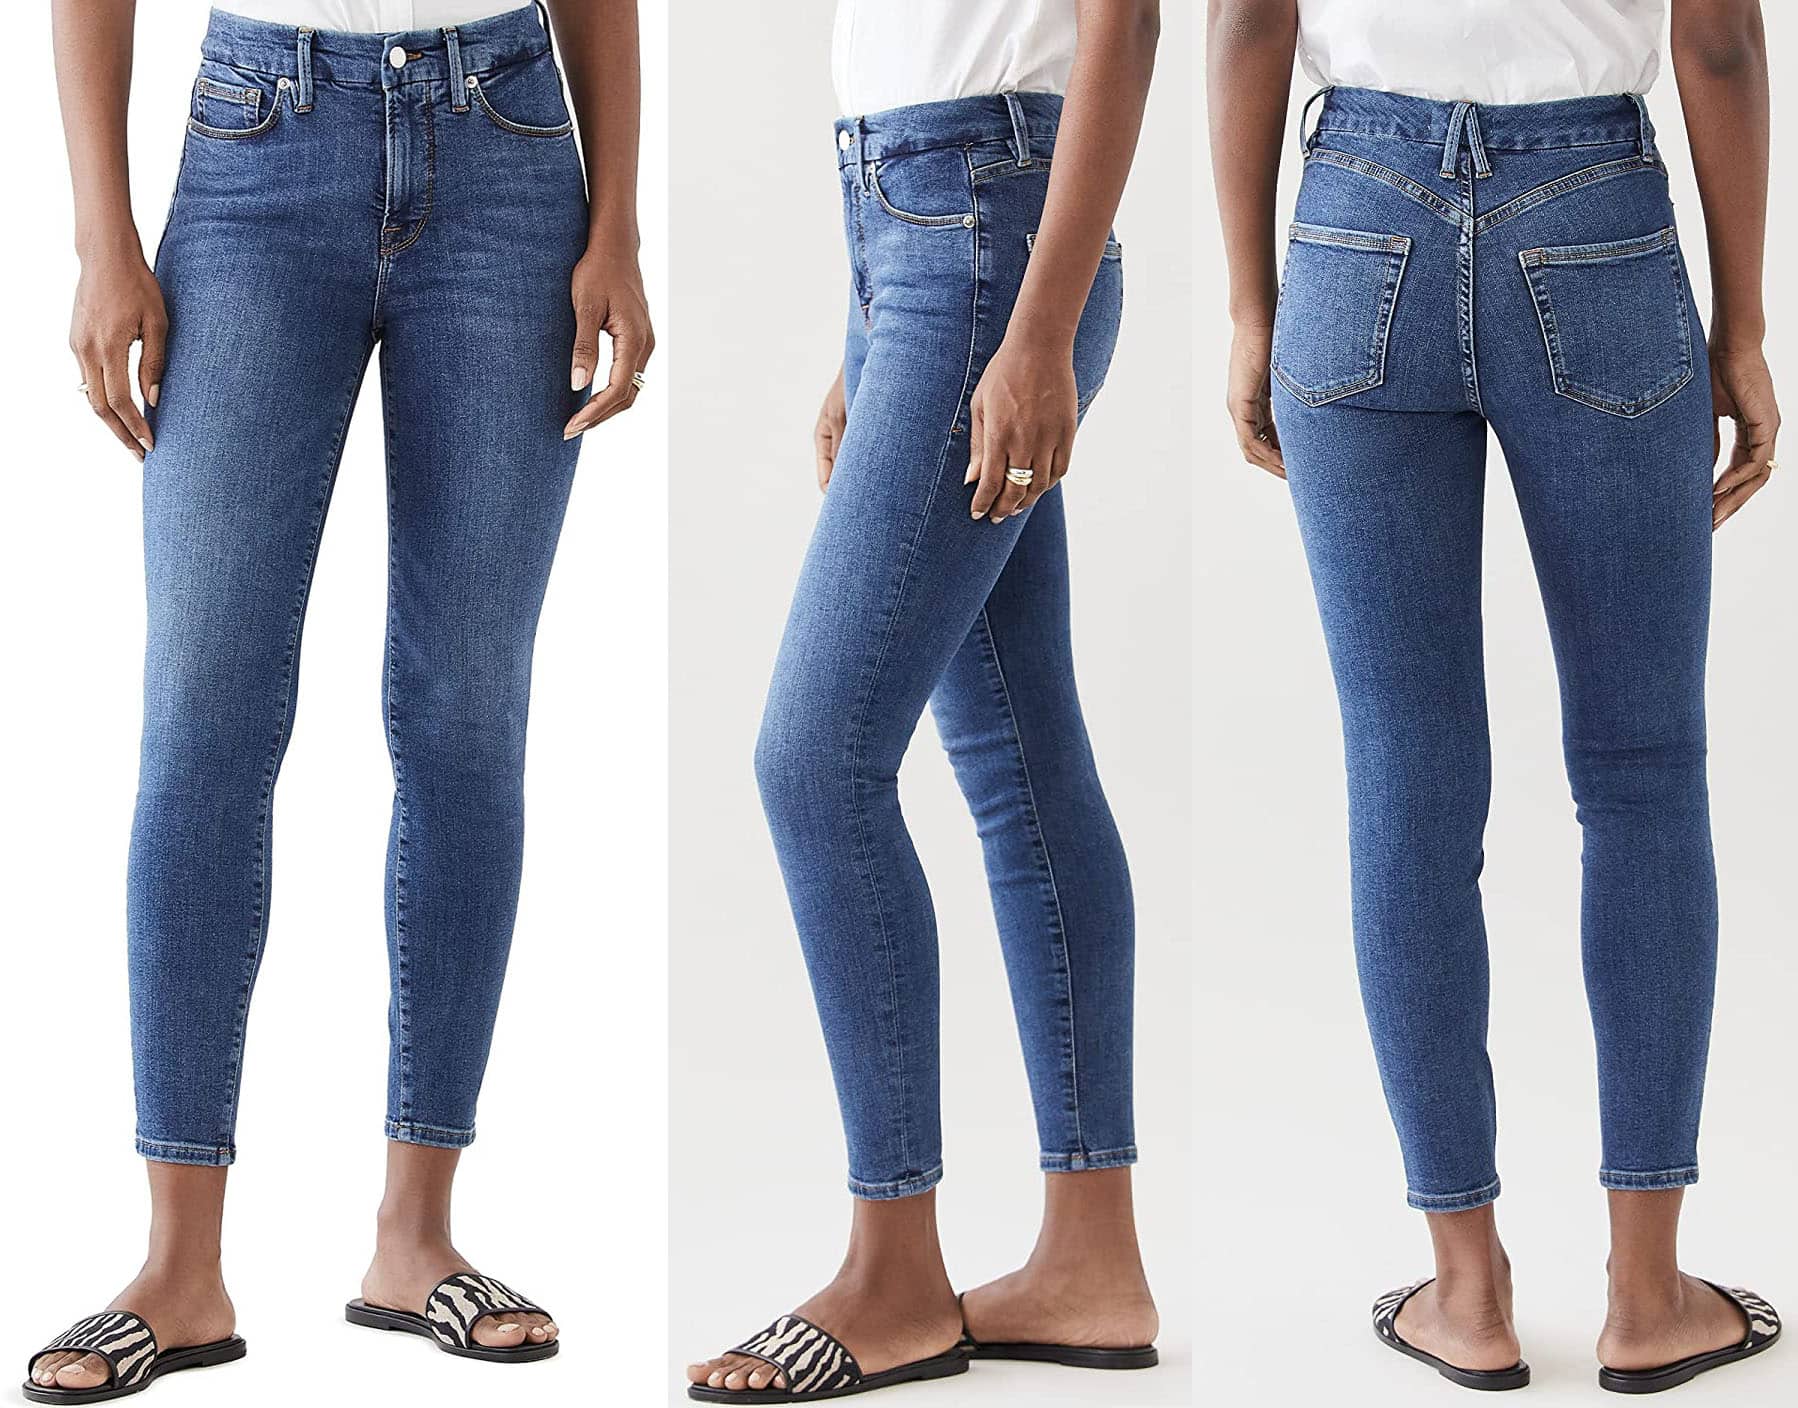 Good American's Good Legs Crop Extreme V is the ultimate skinny sculpting jean, featuring extra stretch, flat tummy tech, and a gap-proof waistband